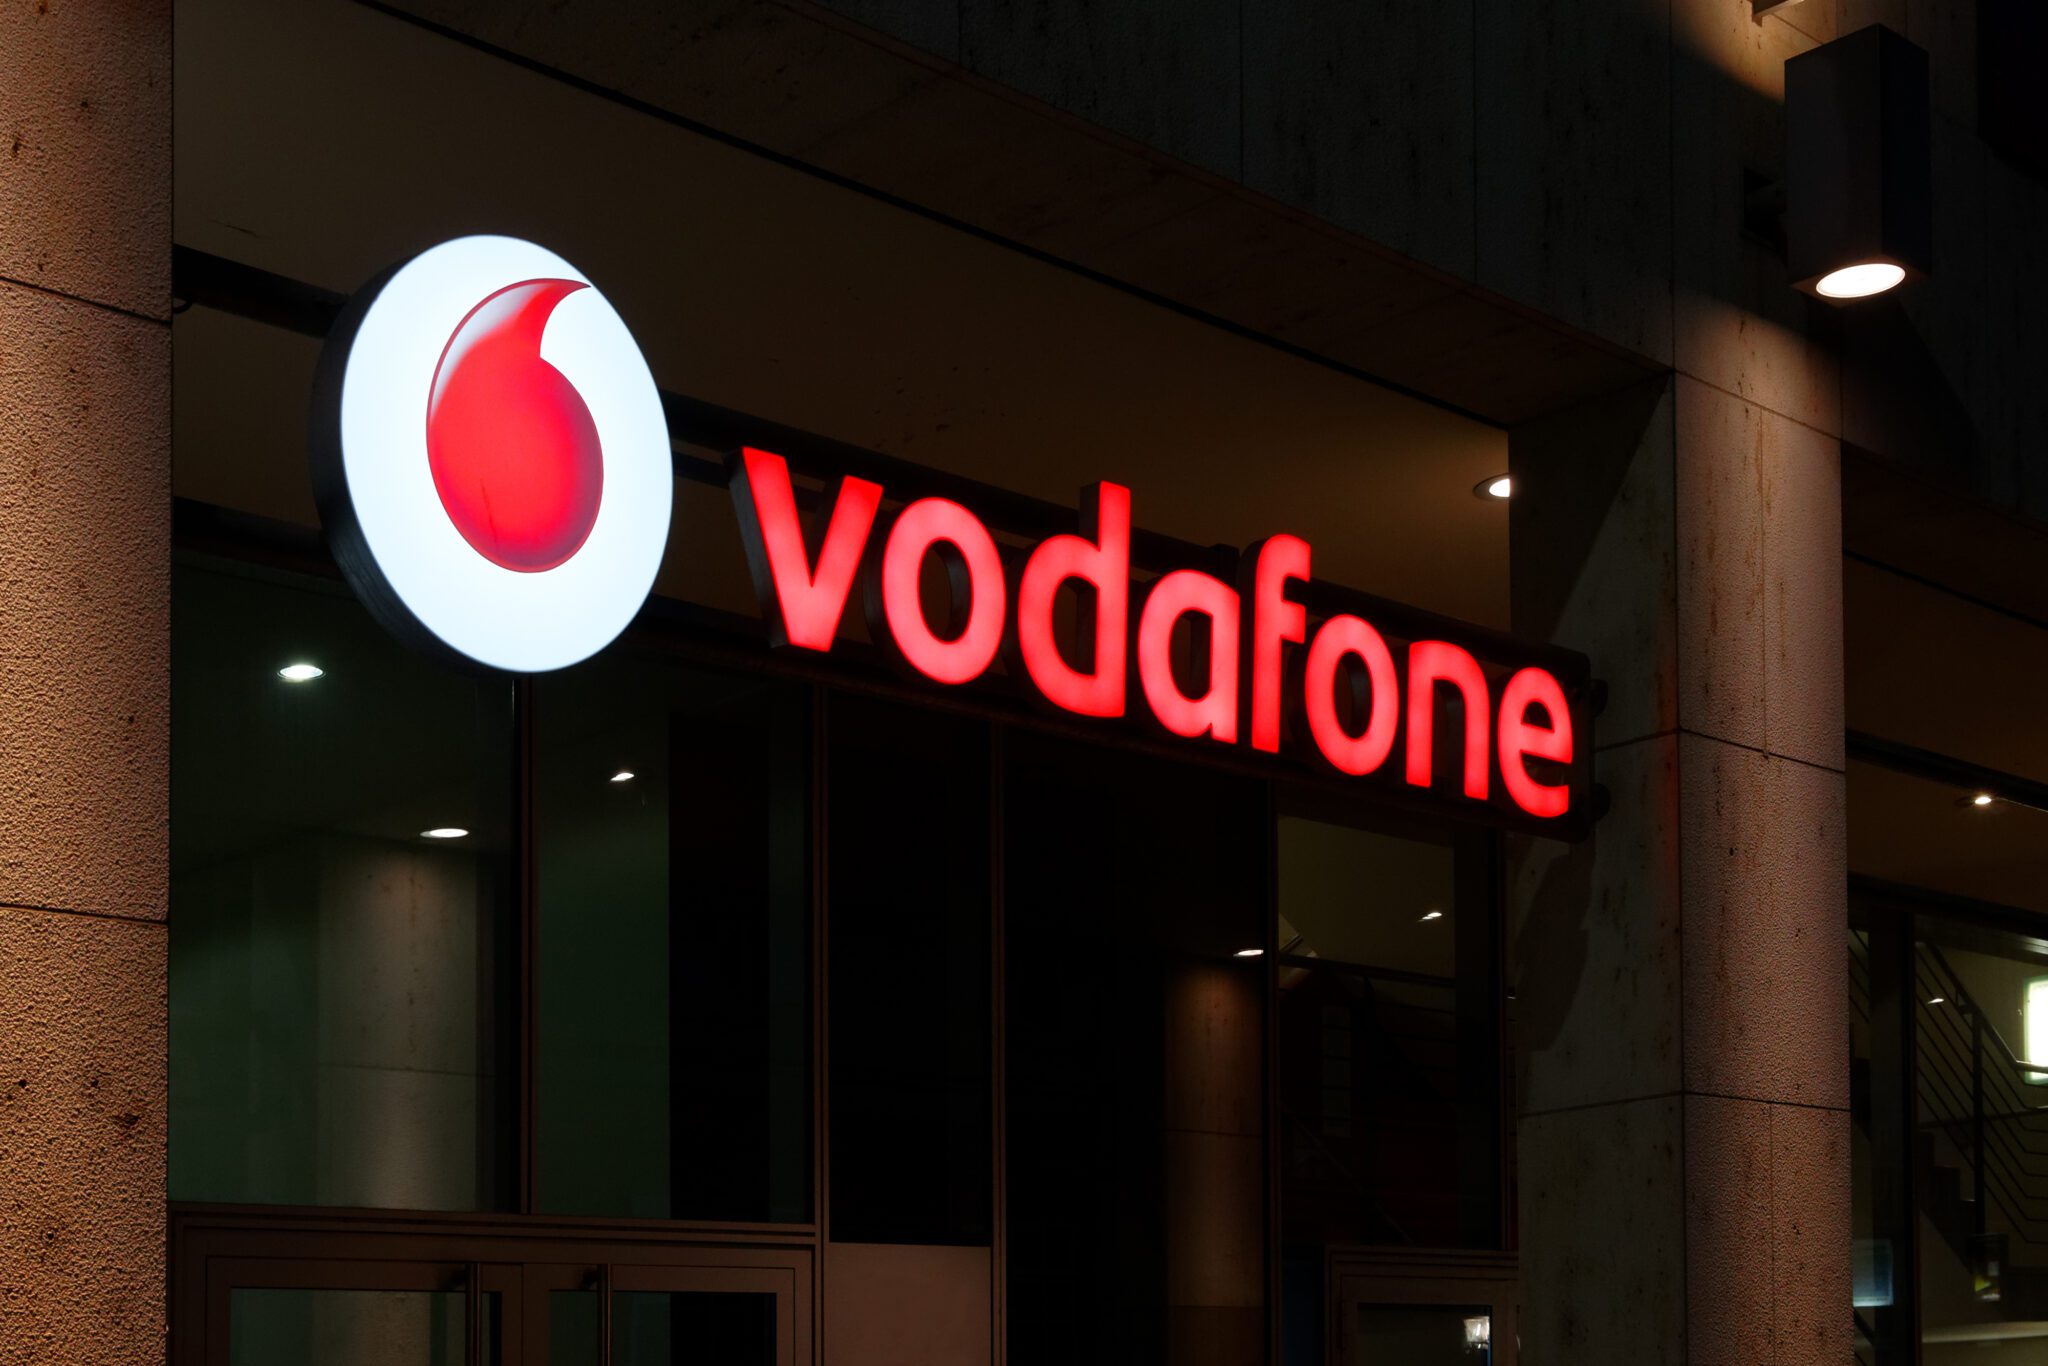 Vodafone and NTT Docomo to simplify open RAN testing and integration